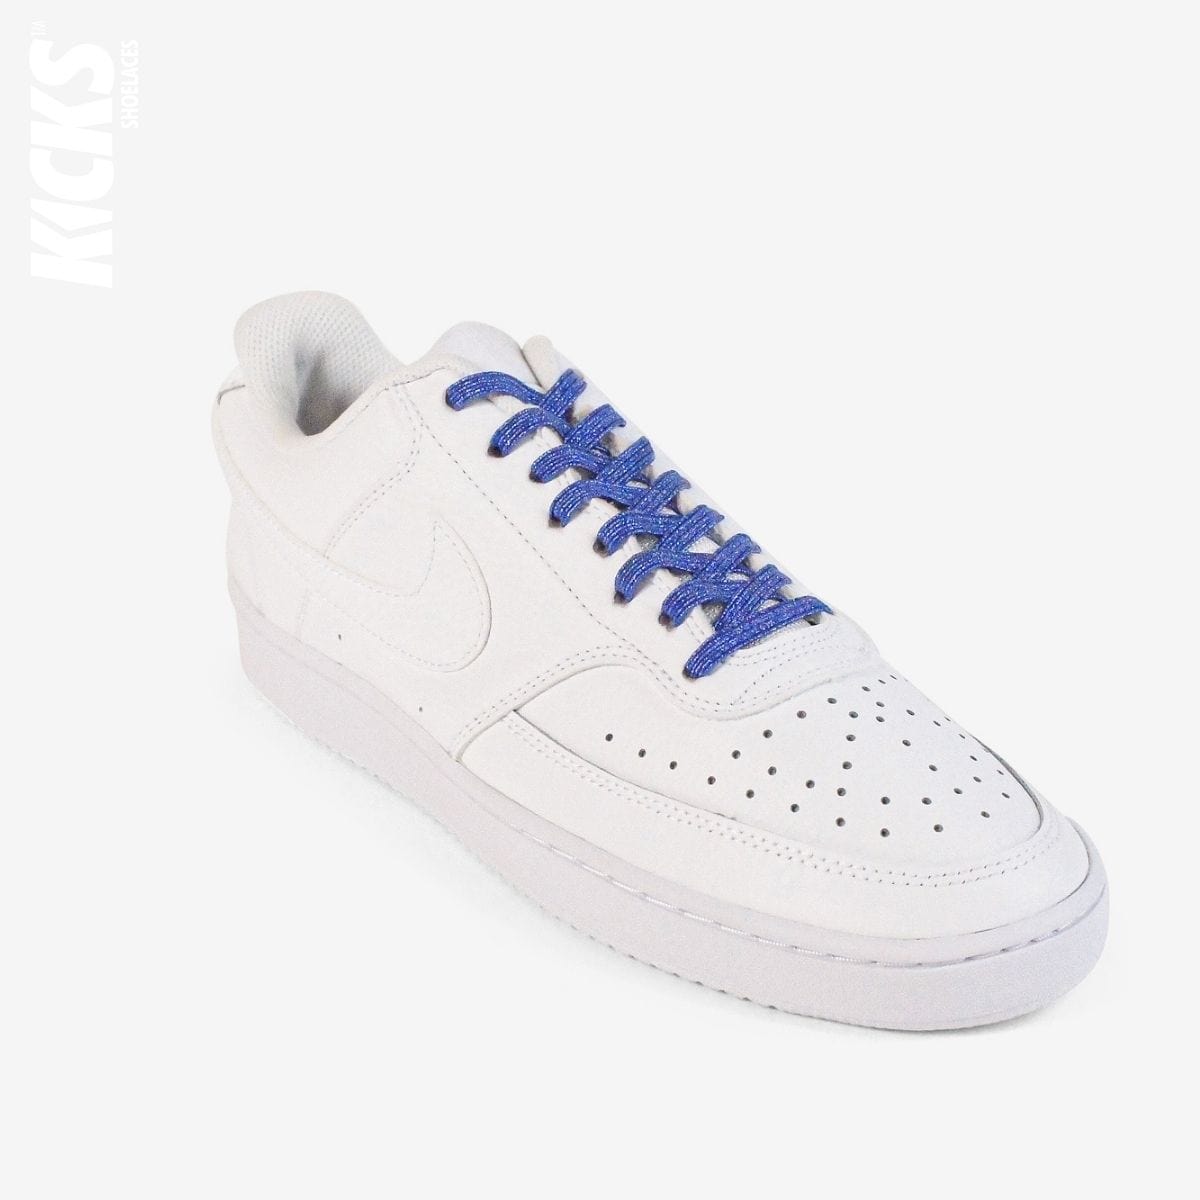 elastic-no-tie-shoelaces-with-royal-blue-laces-on-nike-white-sneakers